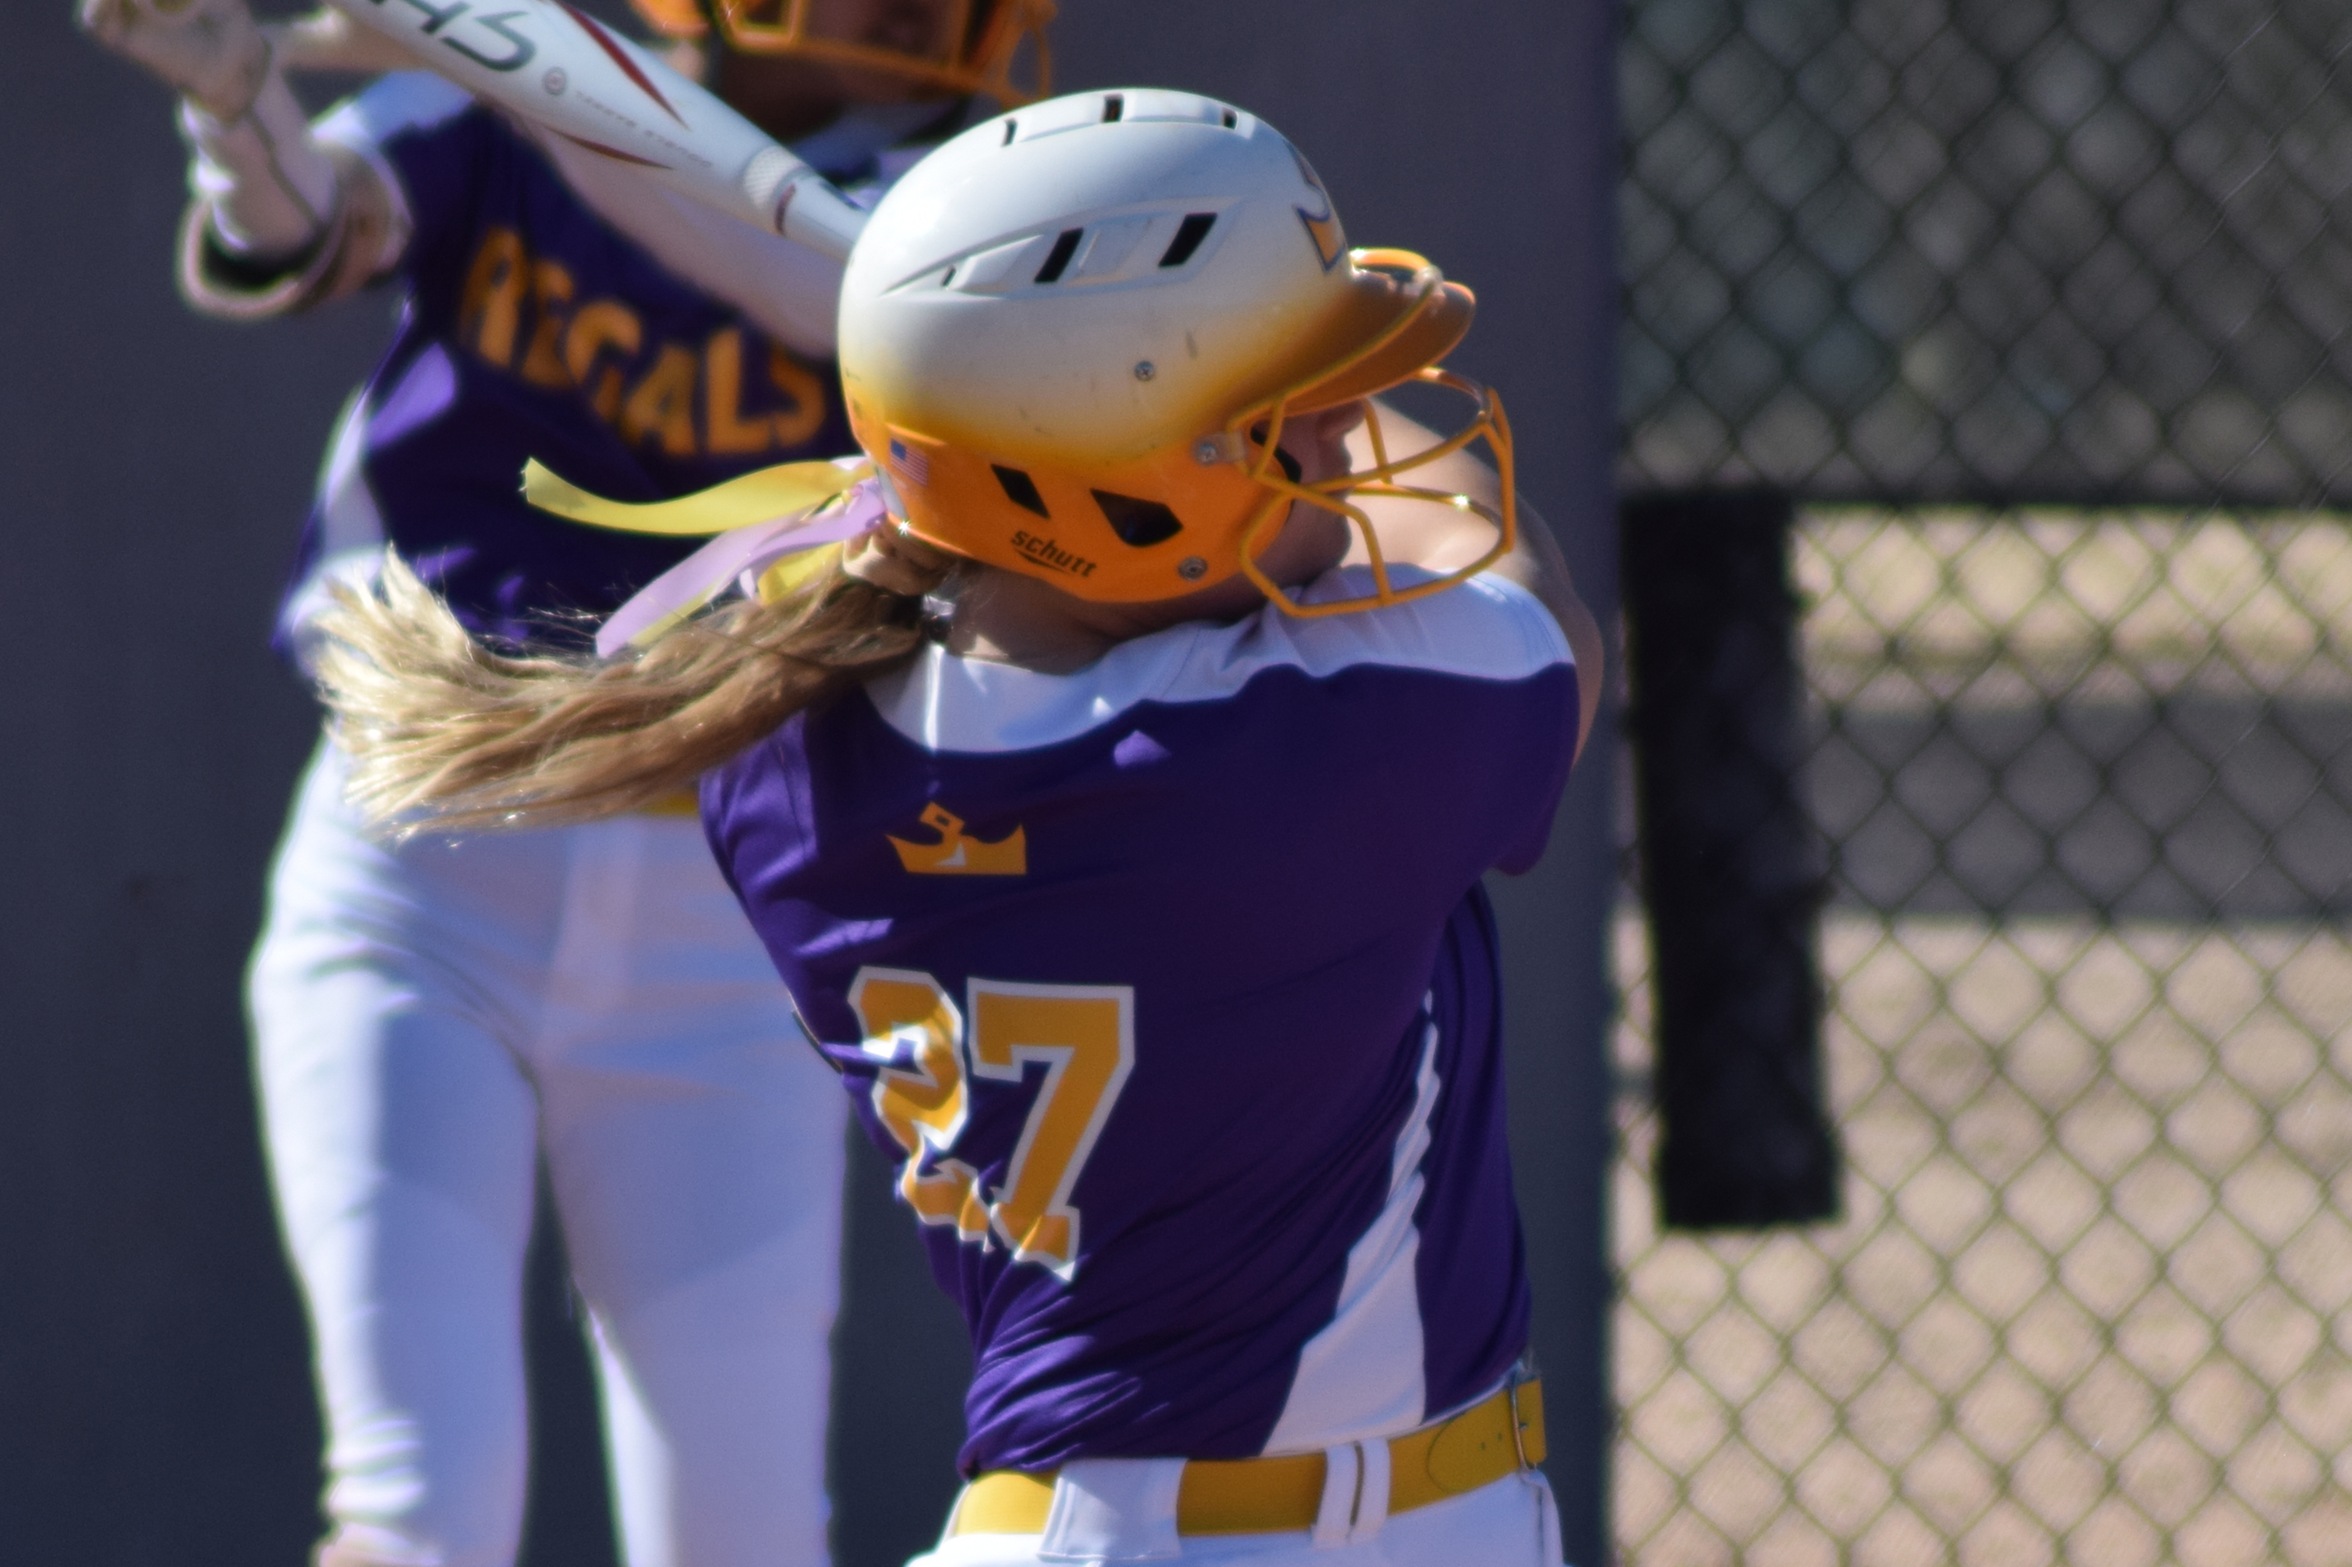 Regals Open Series With 8-6 Win; Booth Leads Team With 3 RBIs